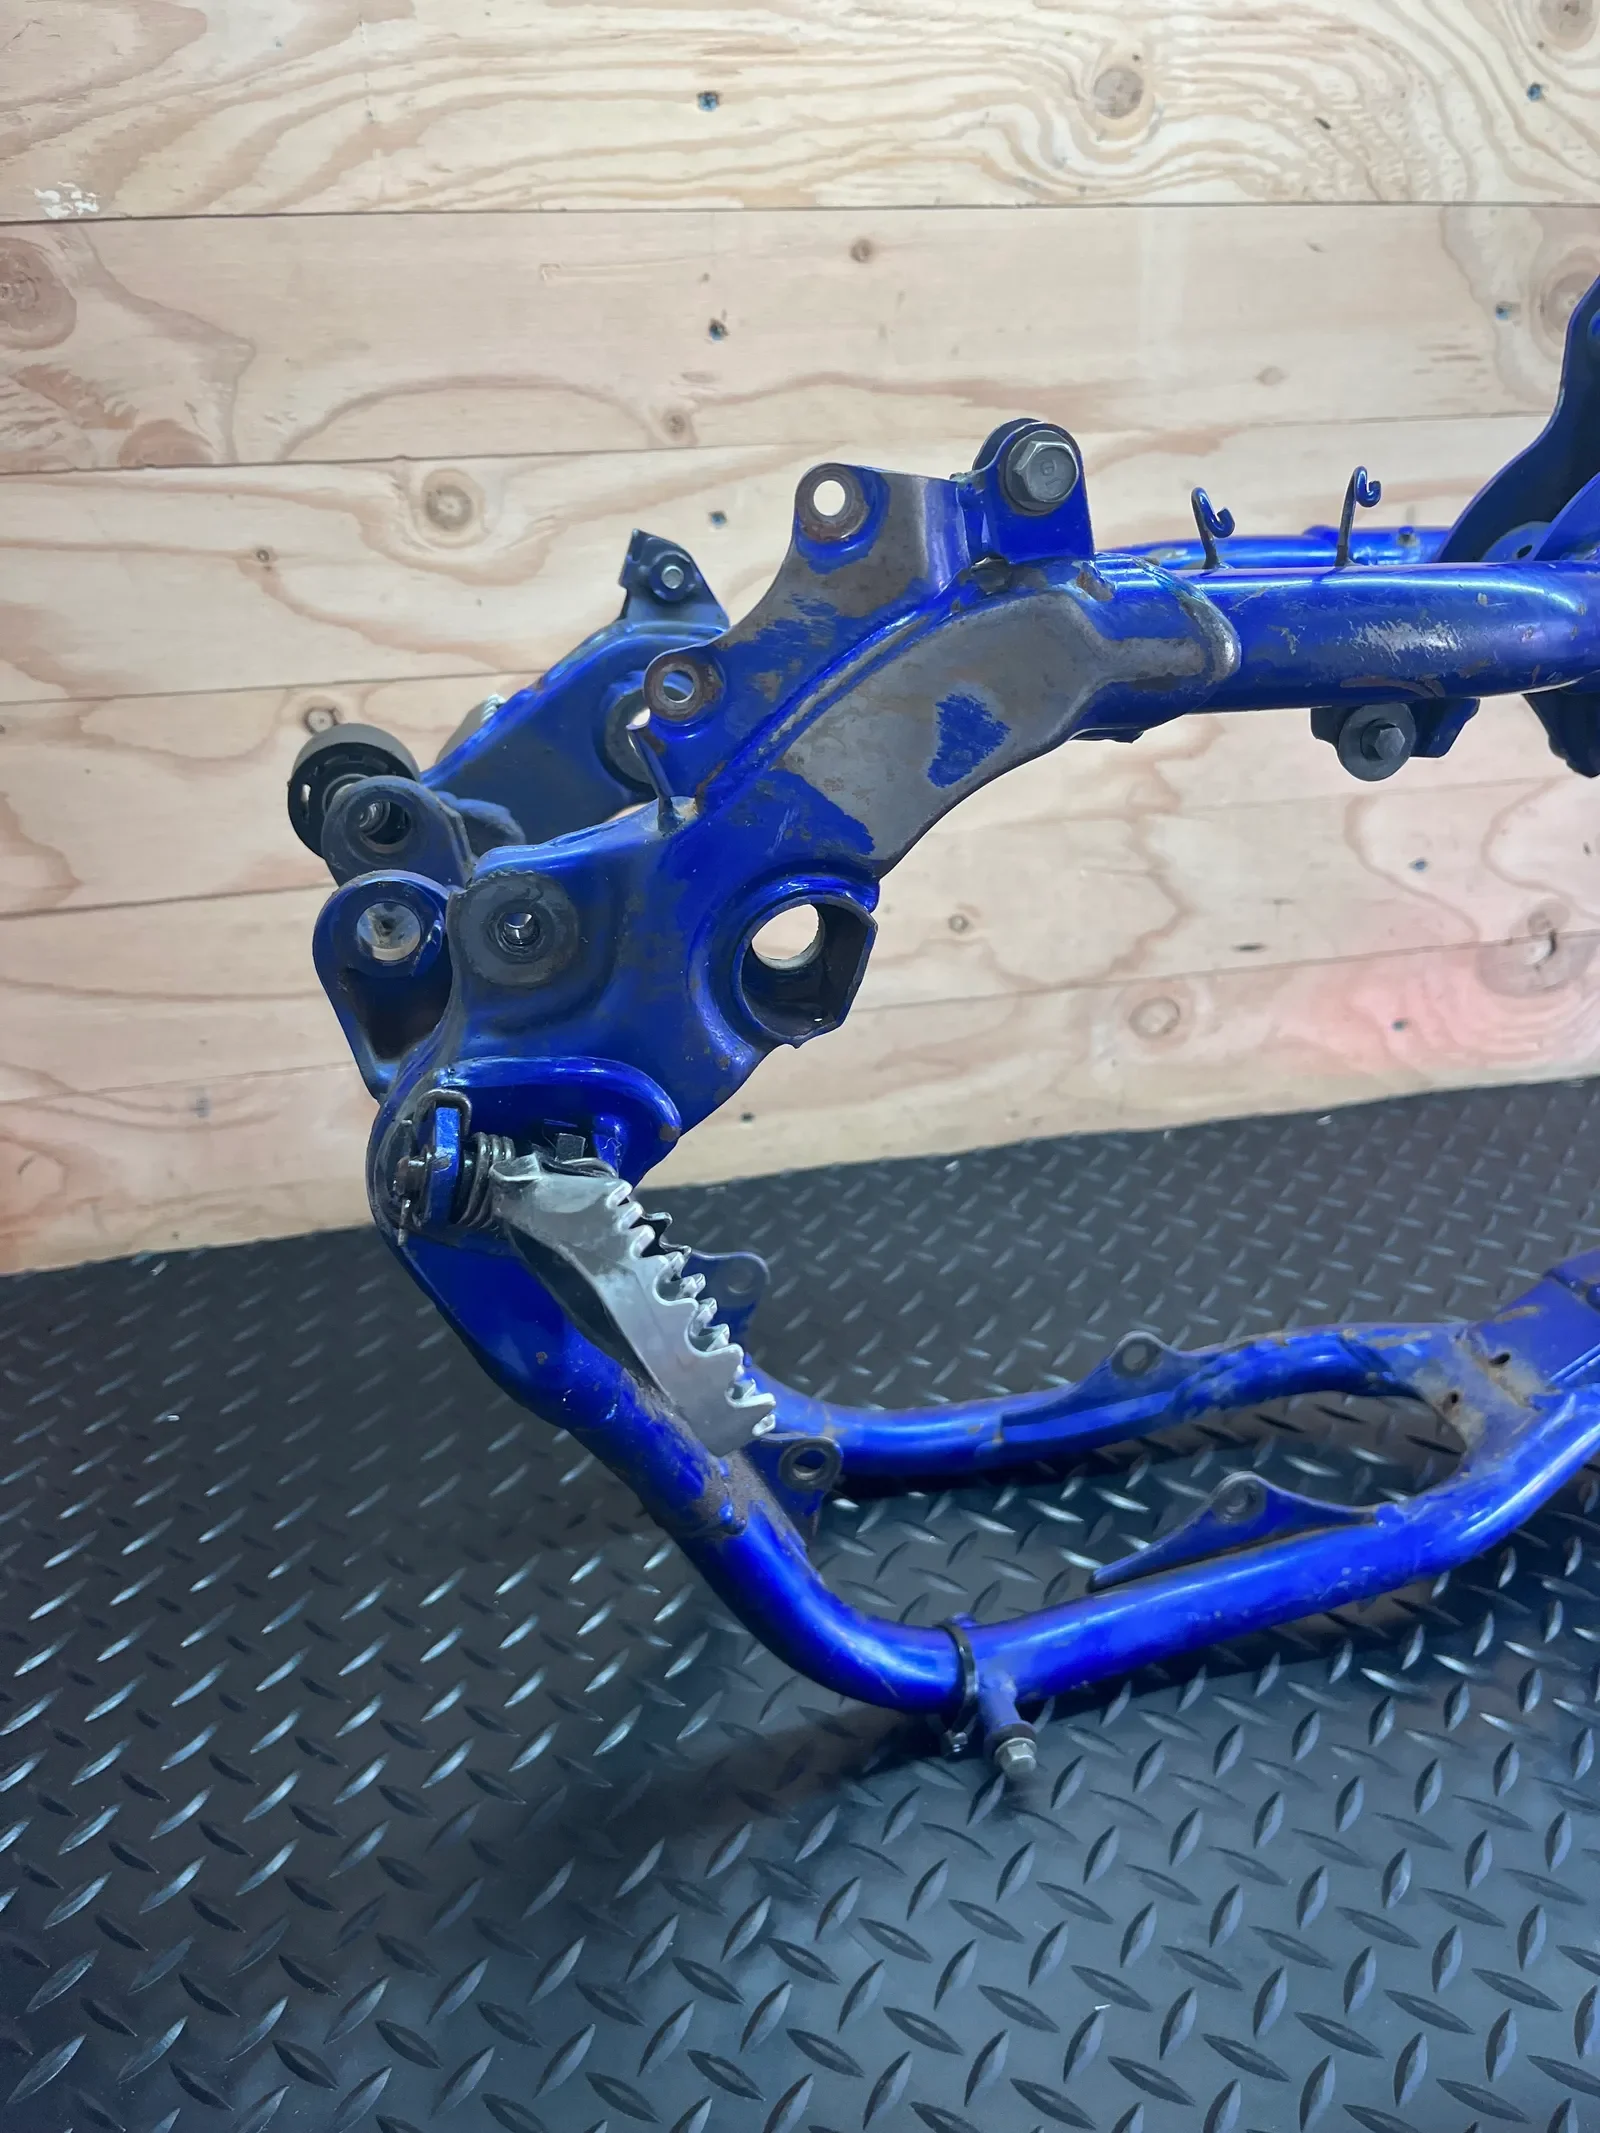 02-04 Yz250 OEM Main Frame Chassis